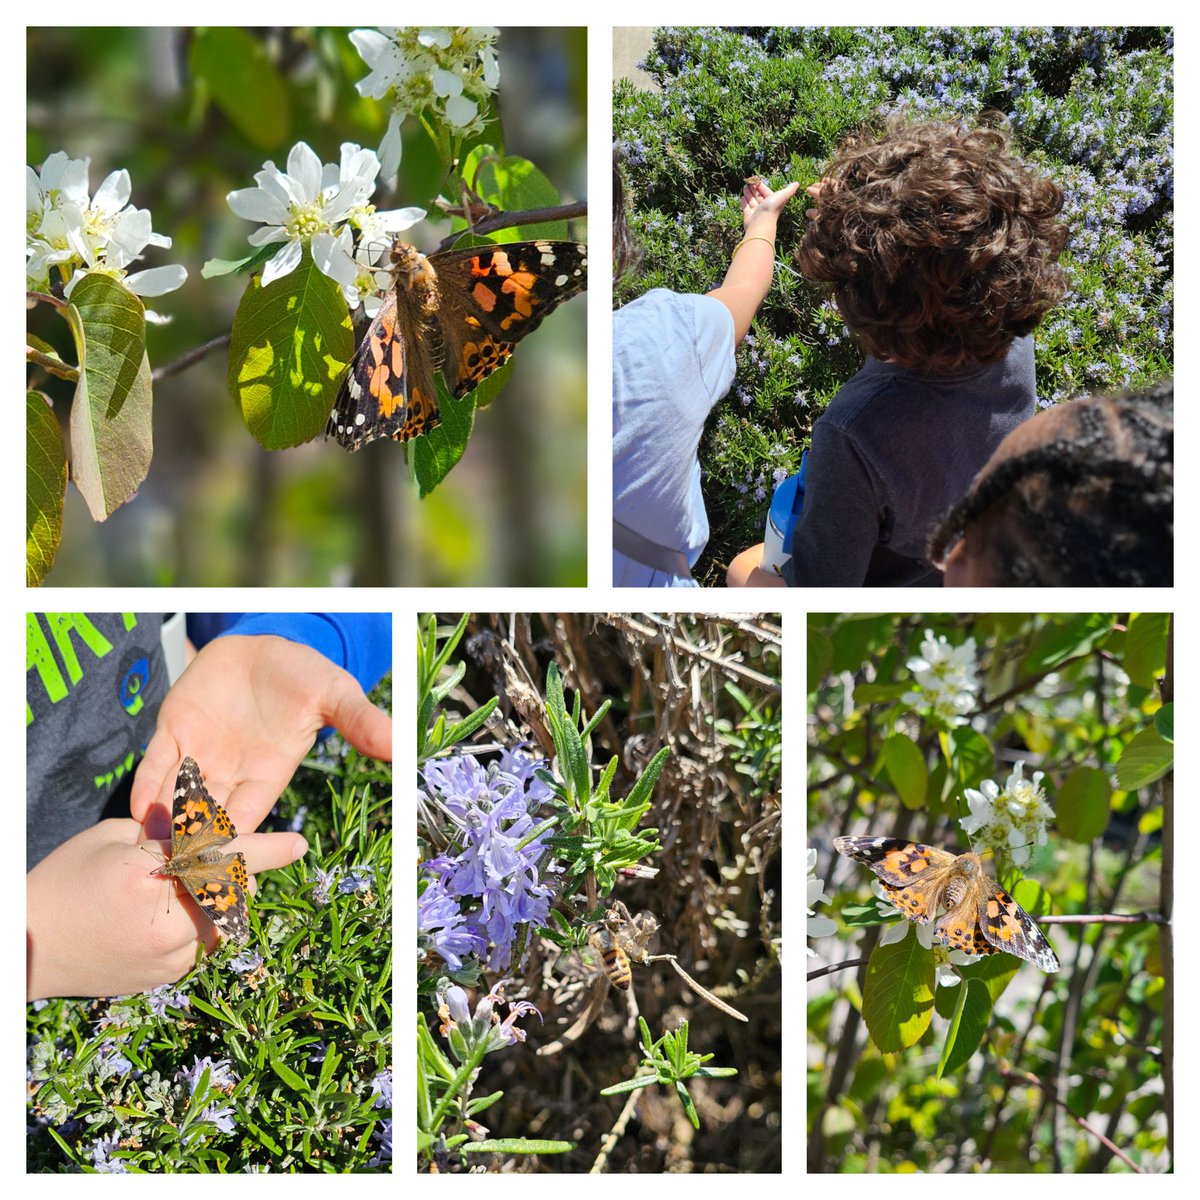 2nd graders @SartoriSTEM are still buzzing about bugs! Today they released the butterflies they raised & observed. So much learning, asking questions, and doing research from observing this process!